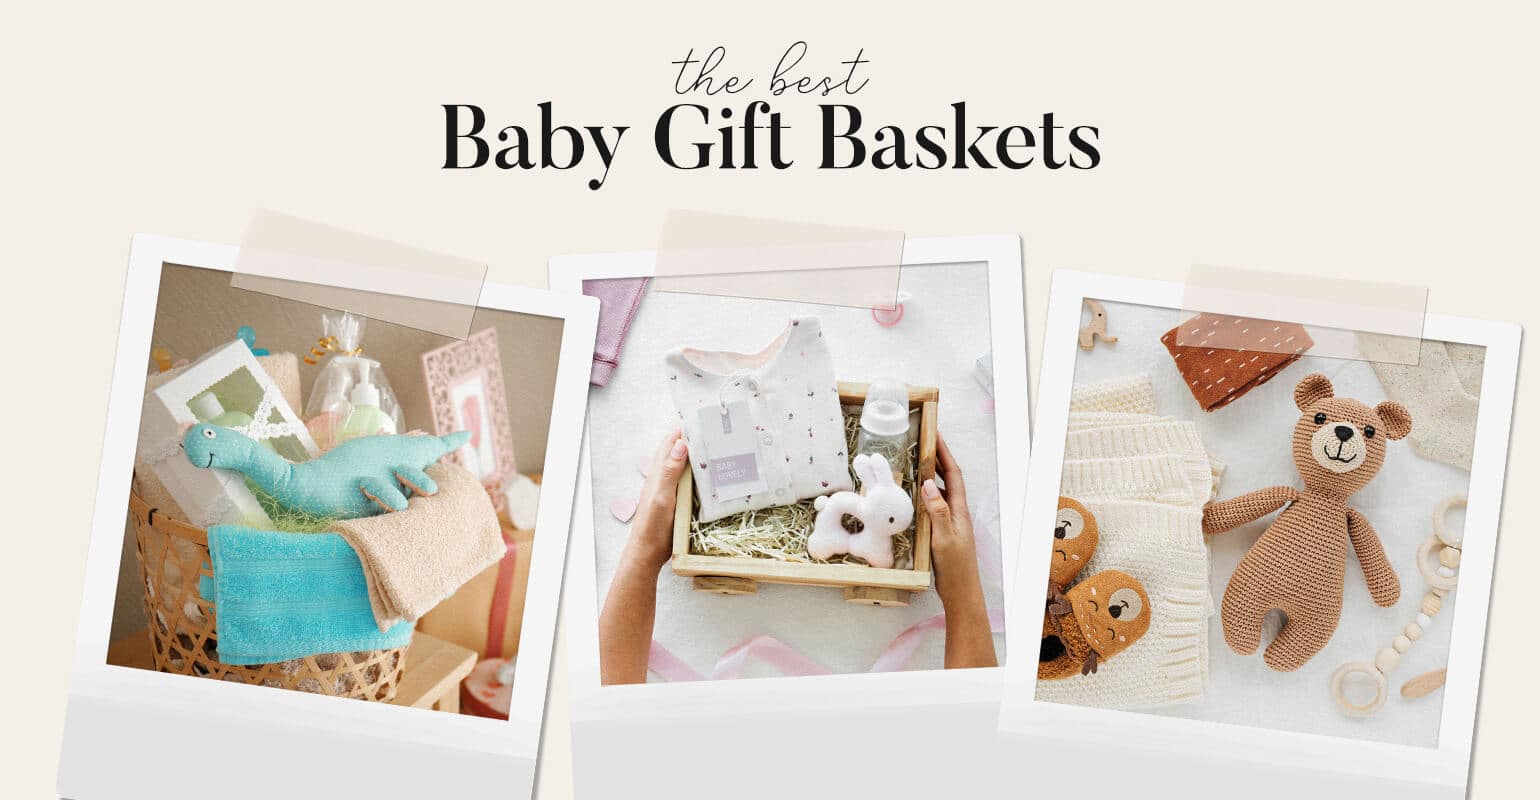 7 Adorable Baby Gift Baskets Guide